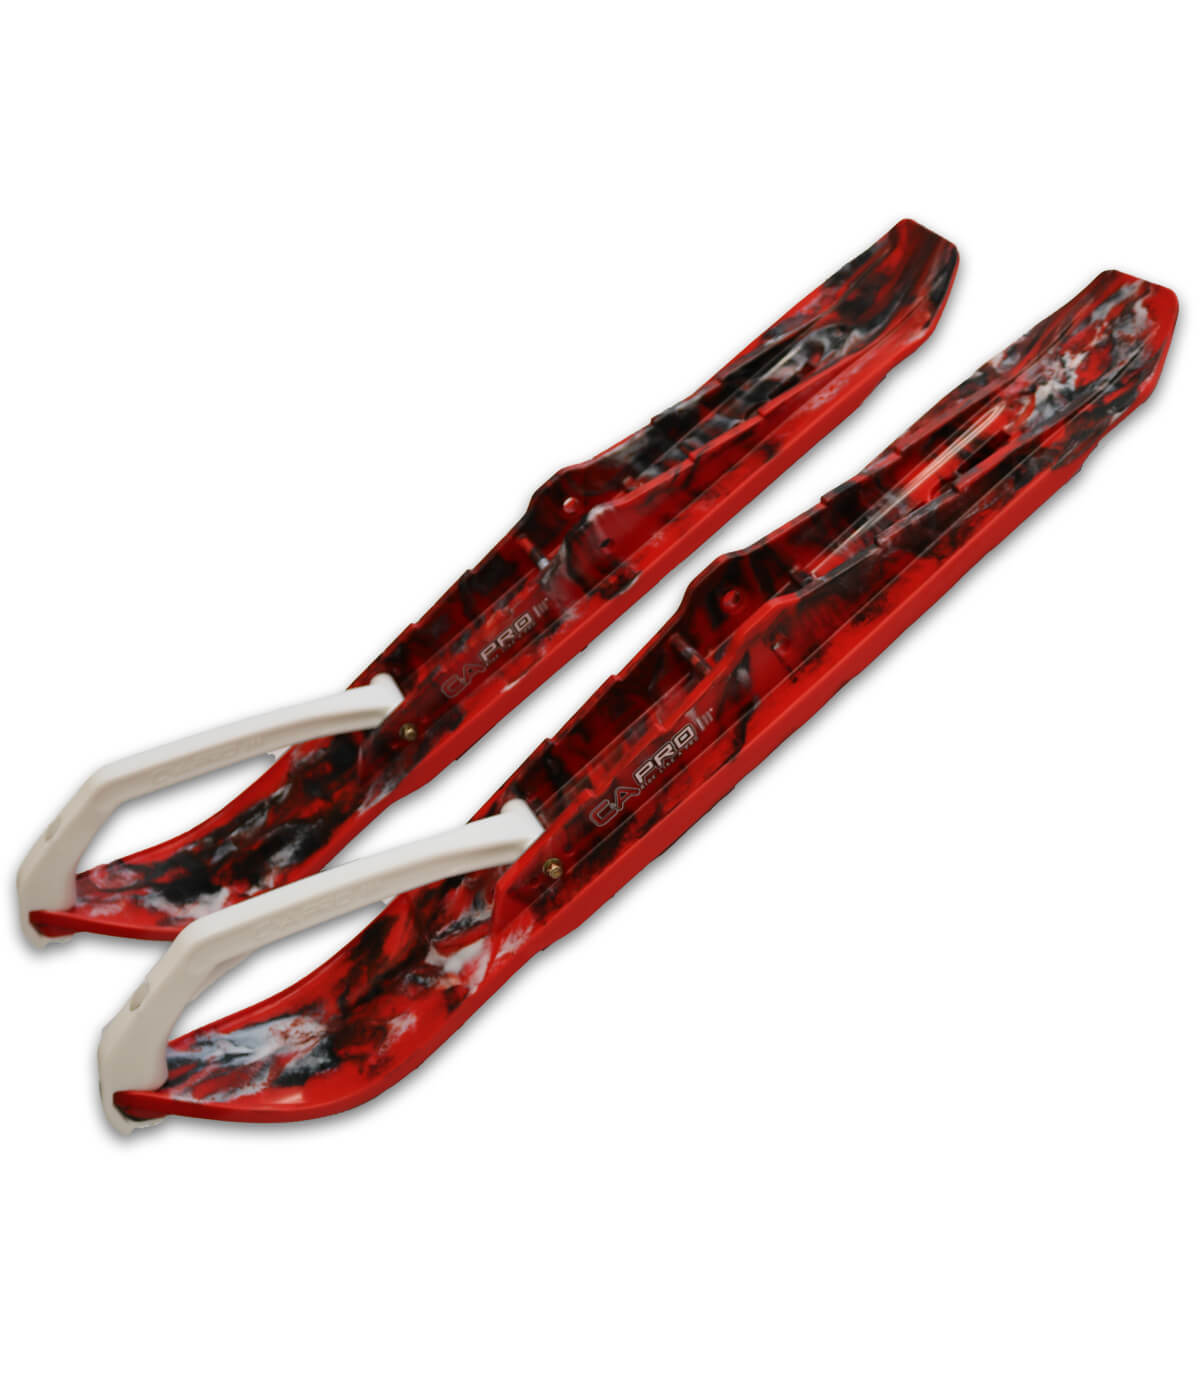 Custom Red MTX ski with Black and White accents and White handle